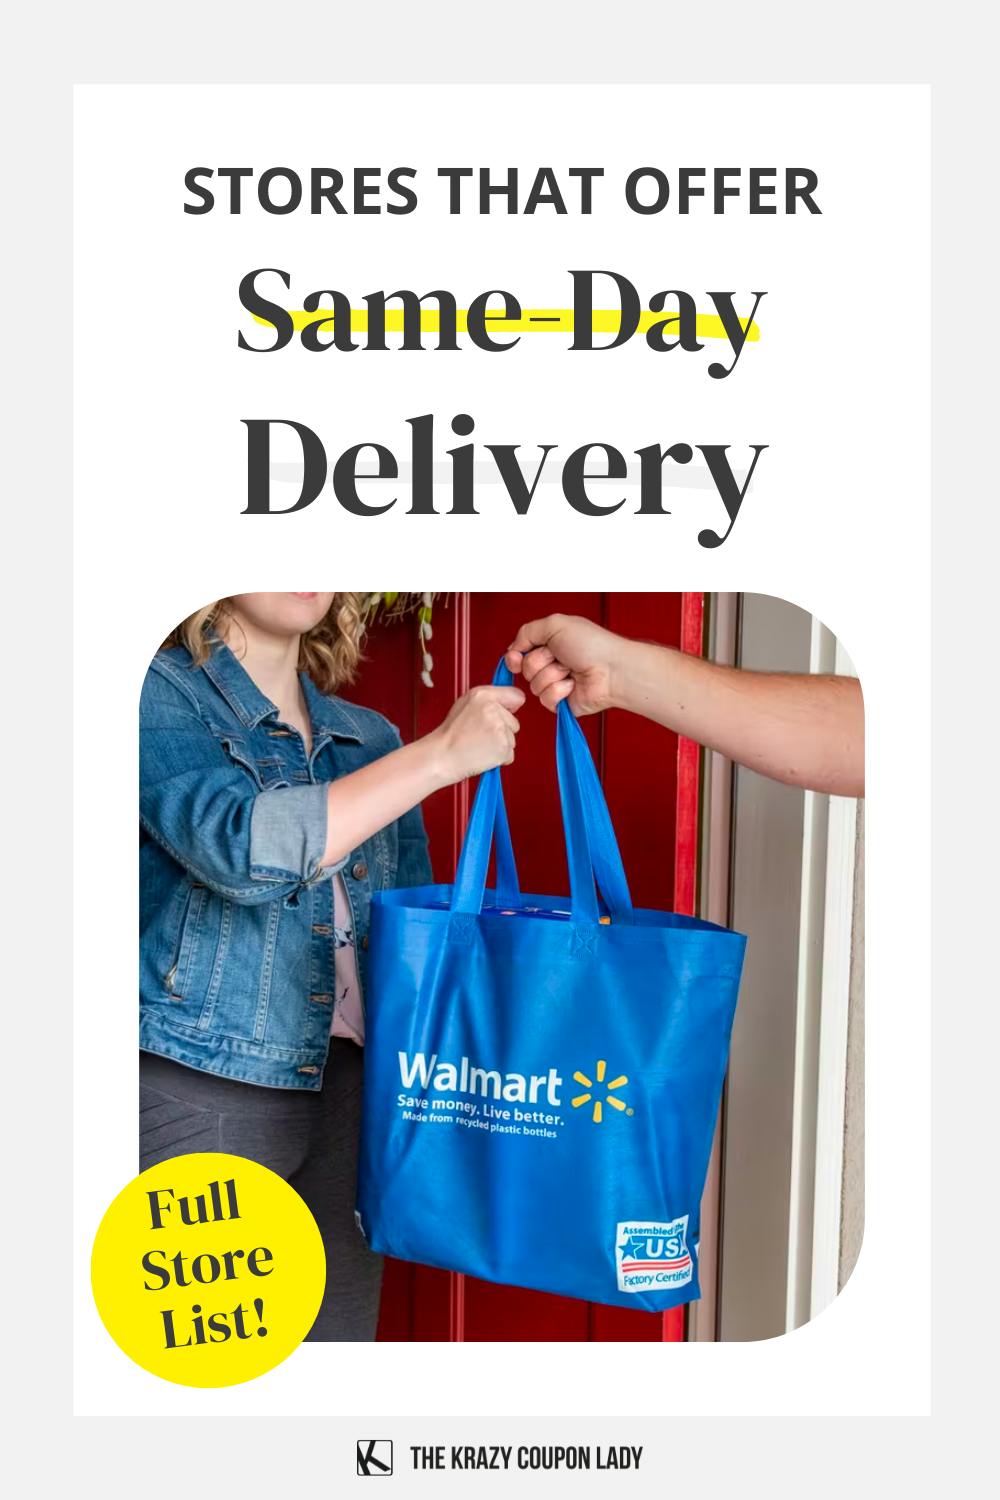 Who Has Same-Day Delivery in 2023? We've Got the Full Store List